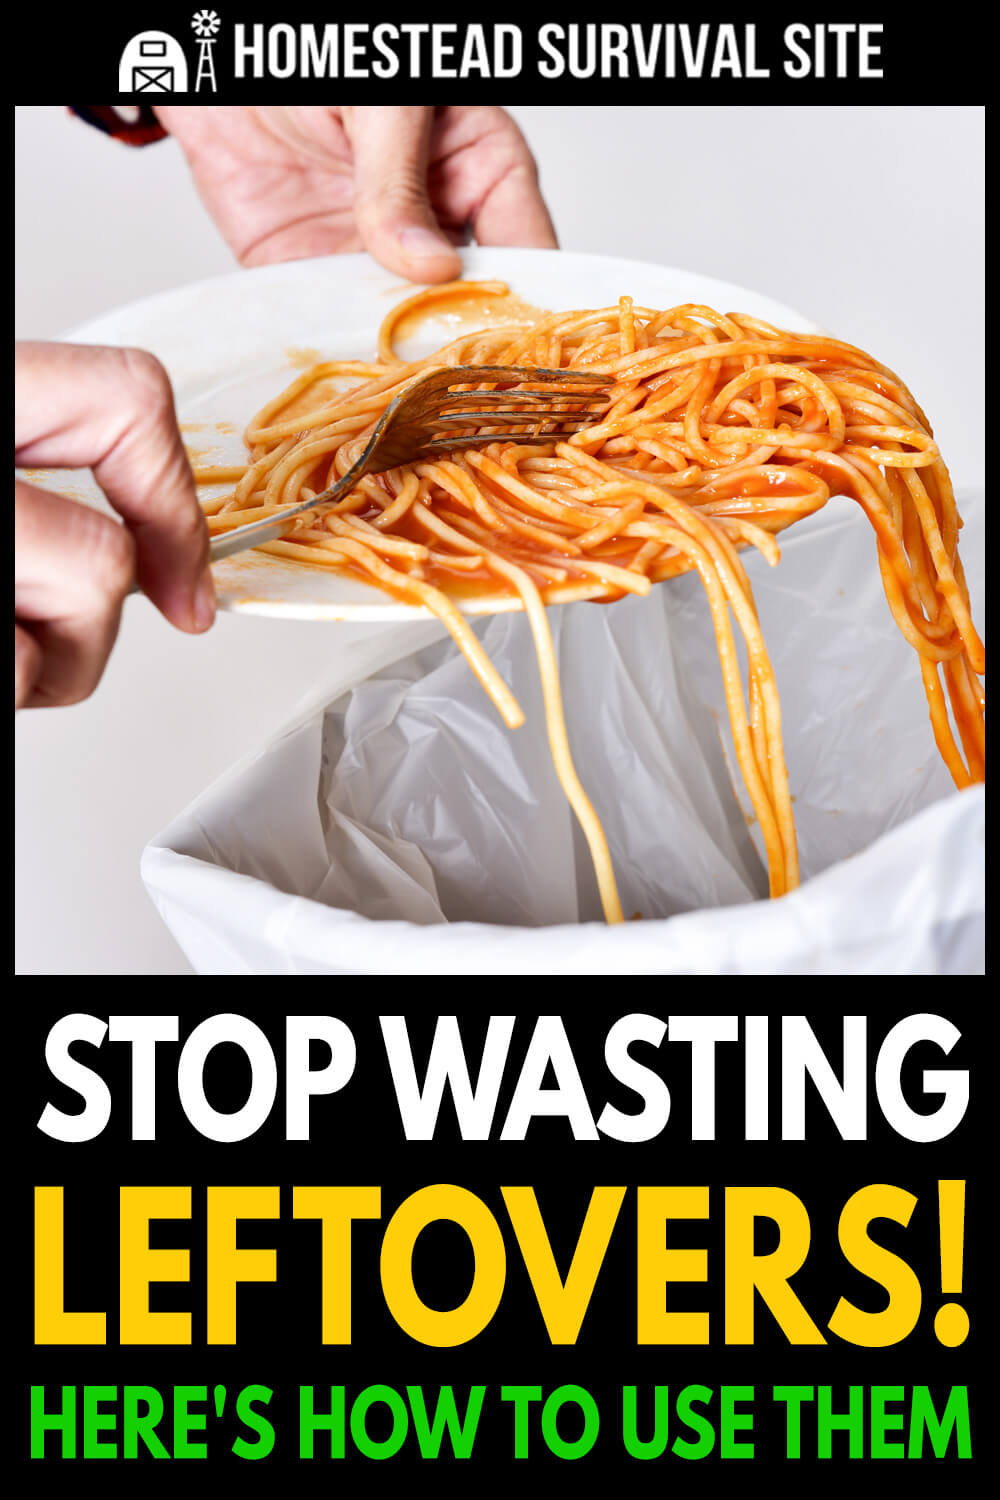 Stop Wasting Leftovers! Here's How to Use Them